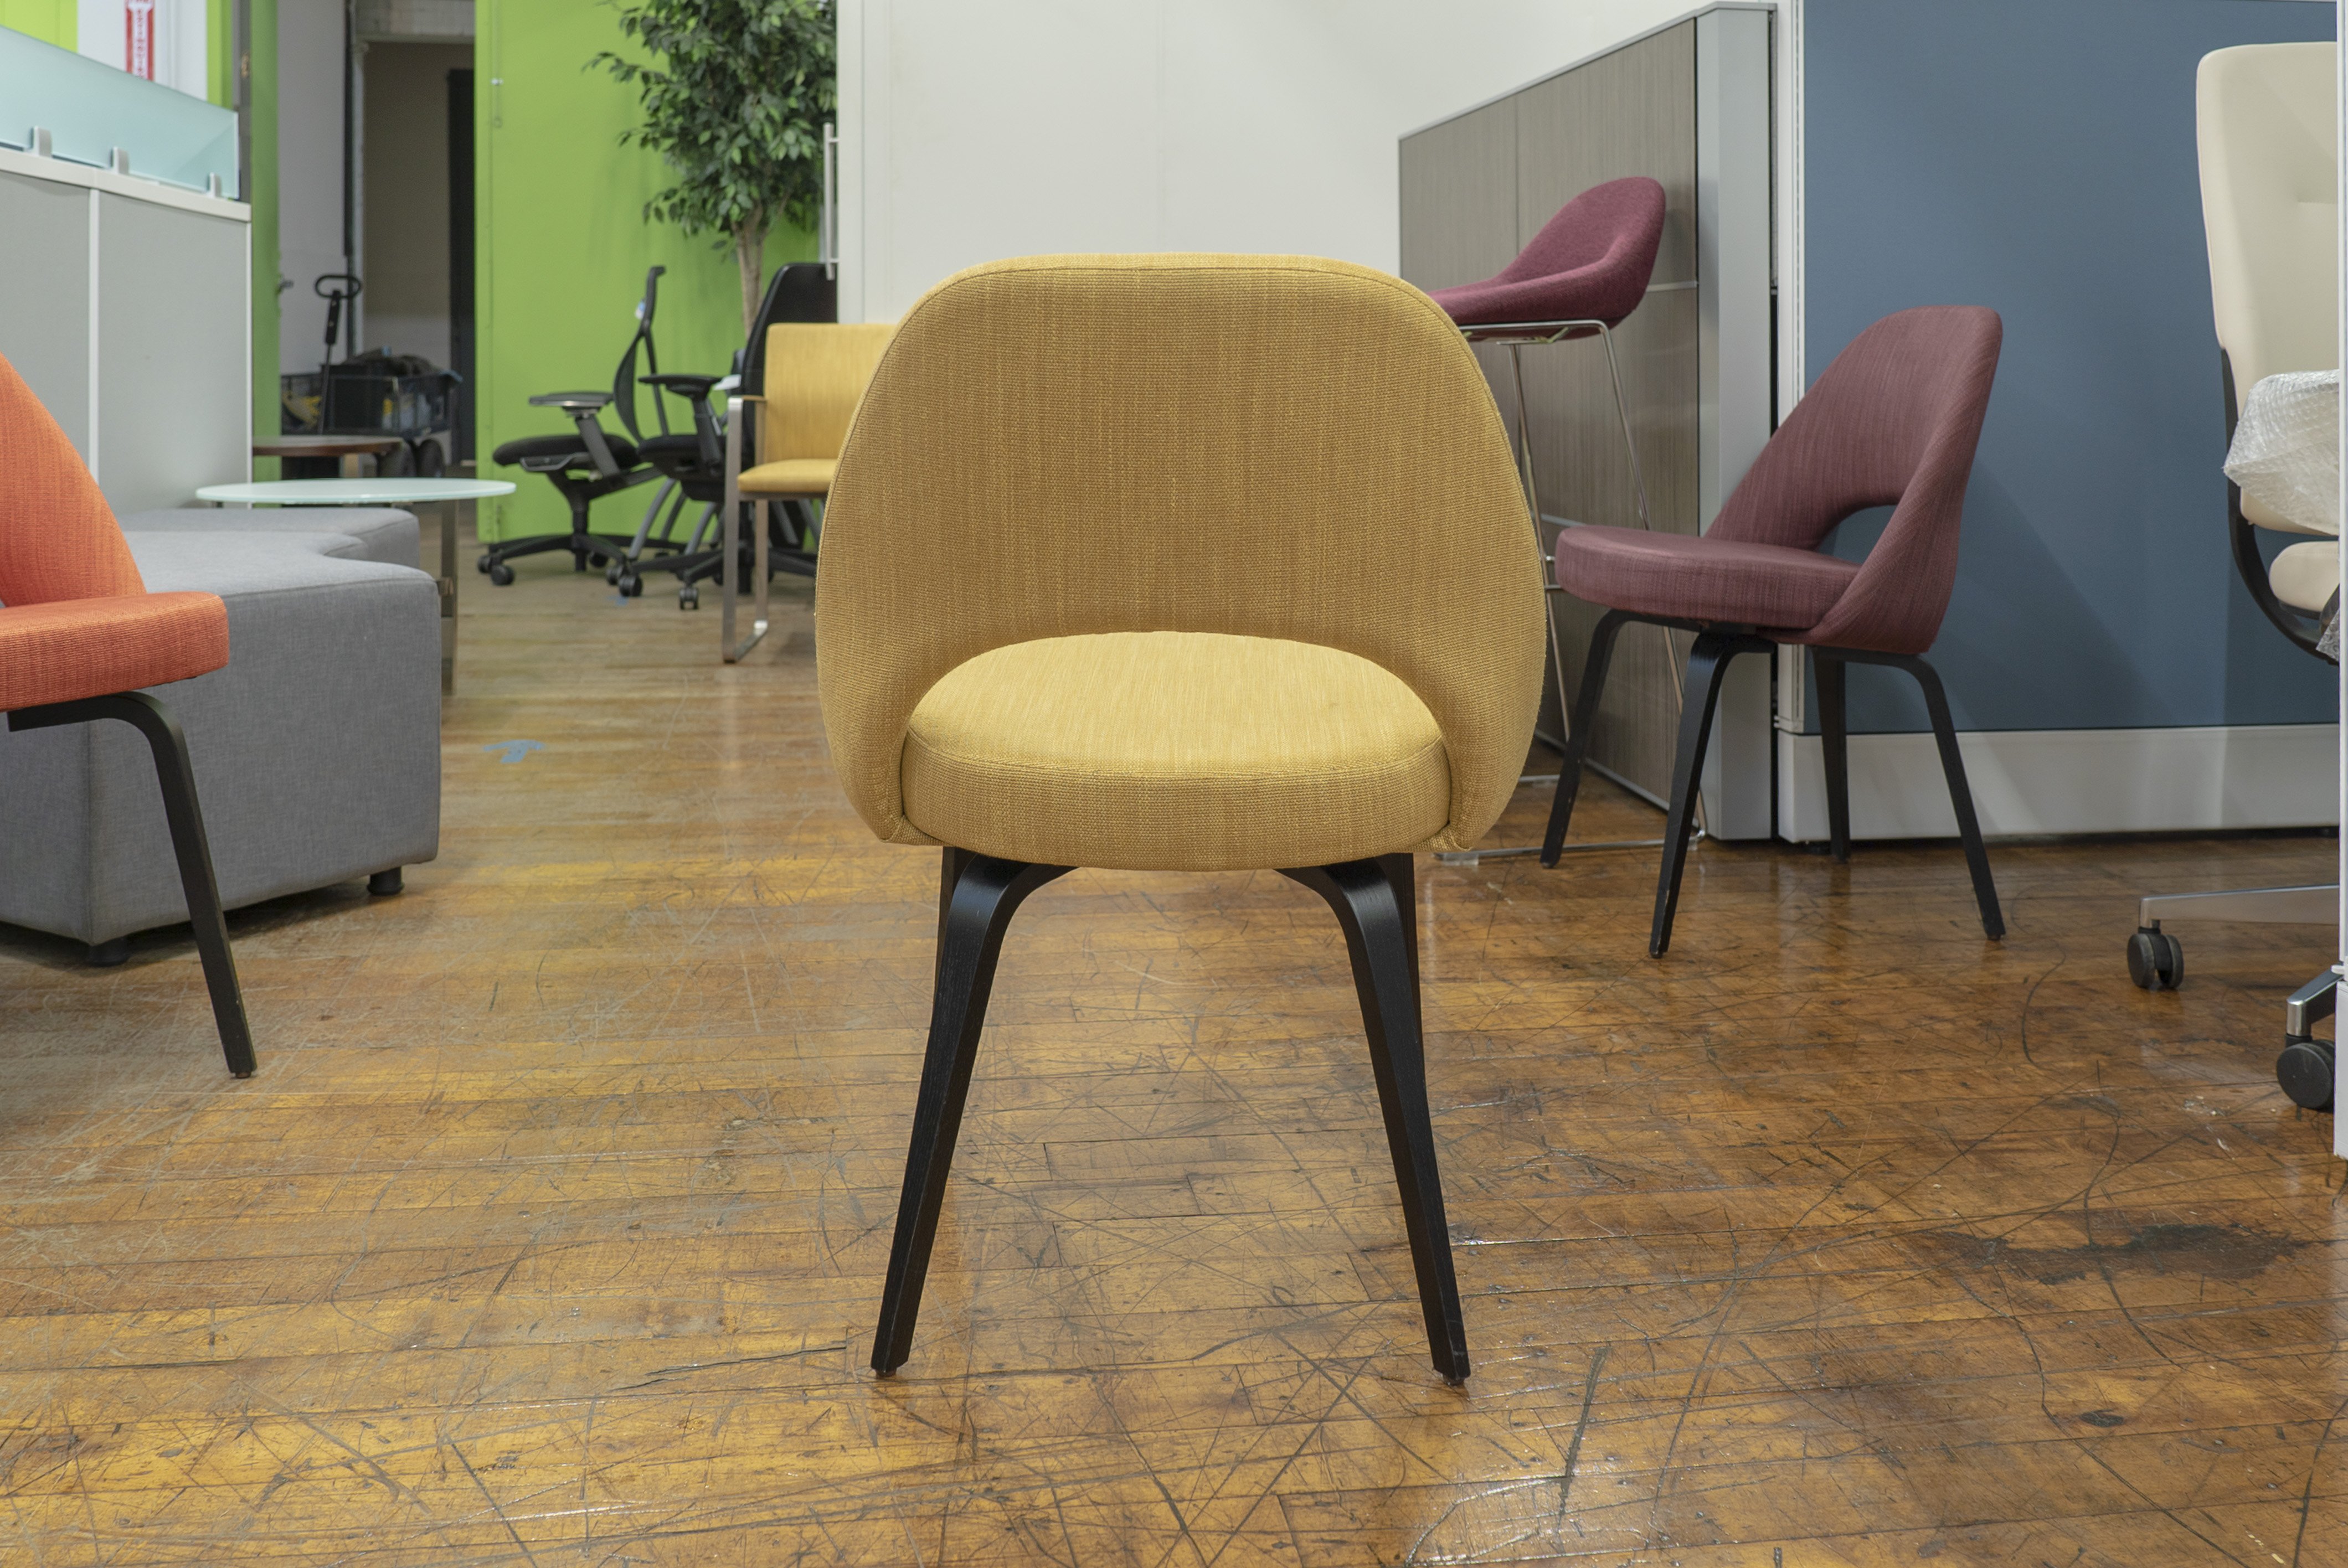 knoll-saarinen-guest-chairs-available-in-3-colors